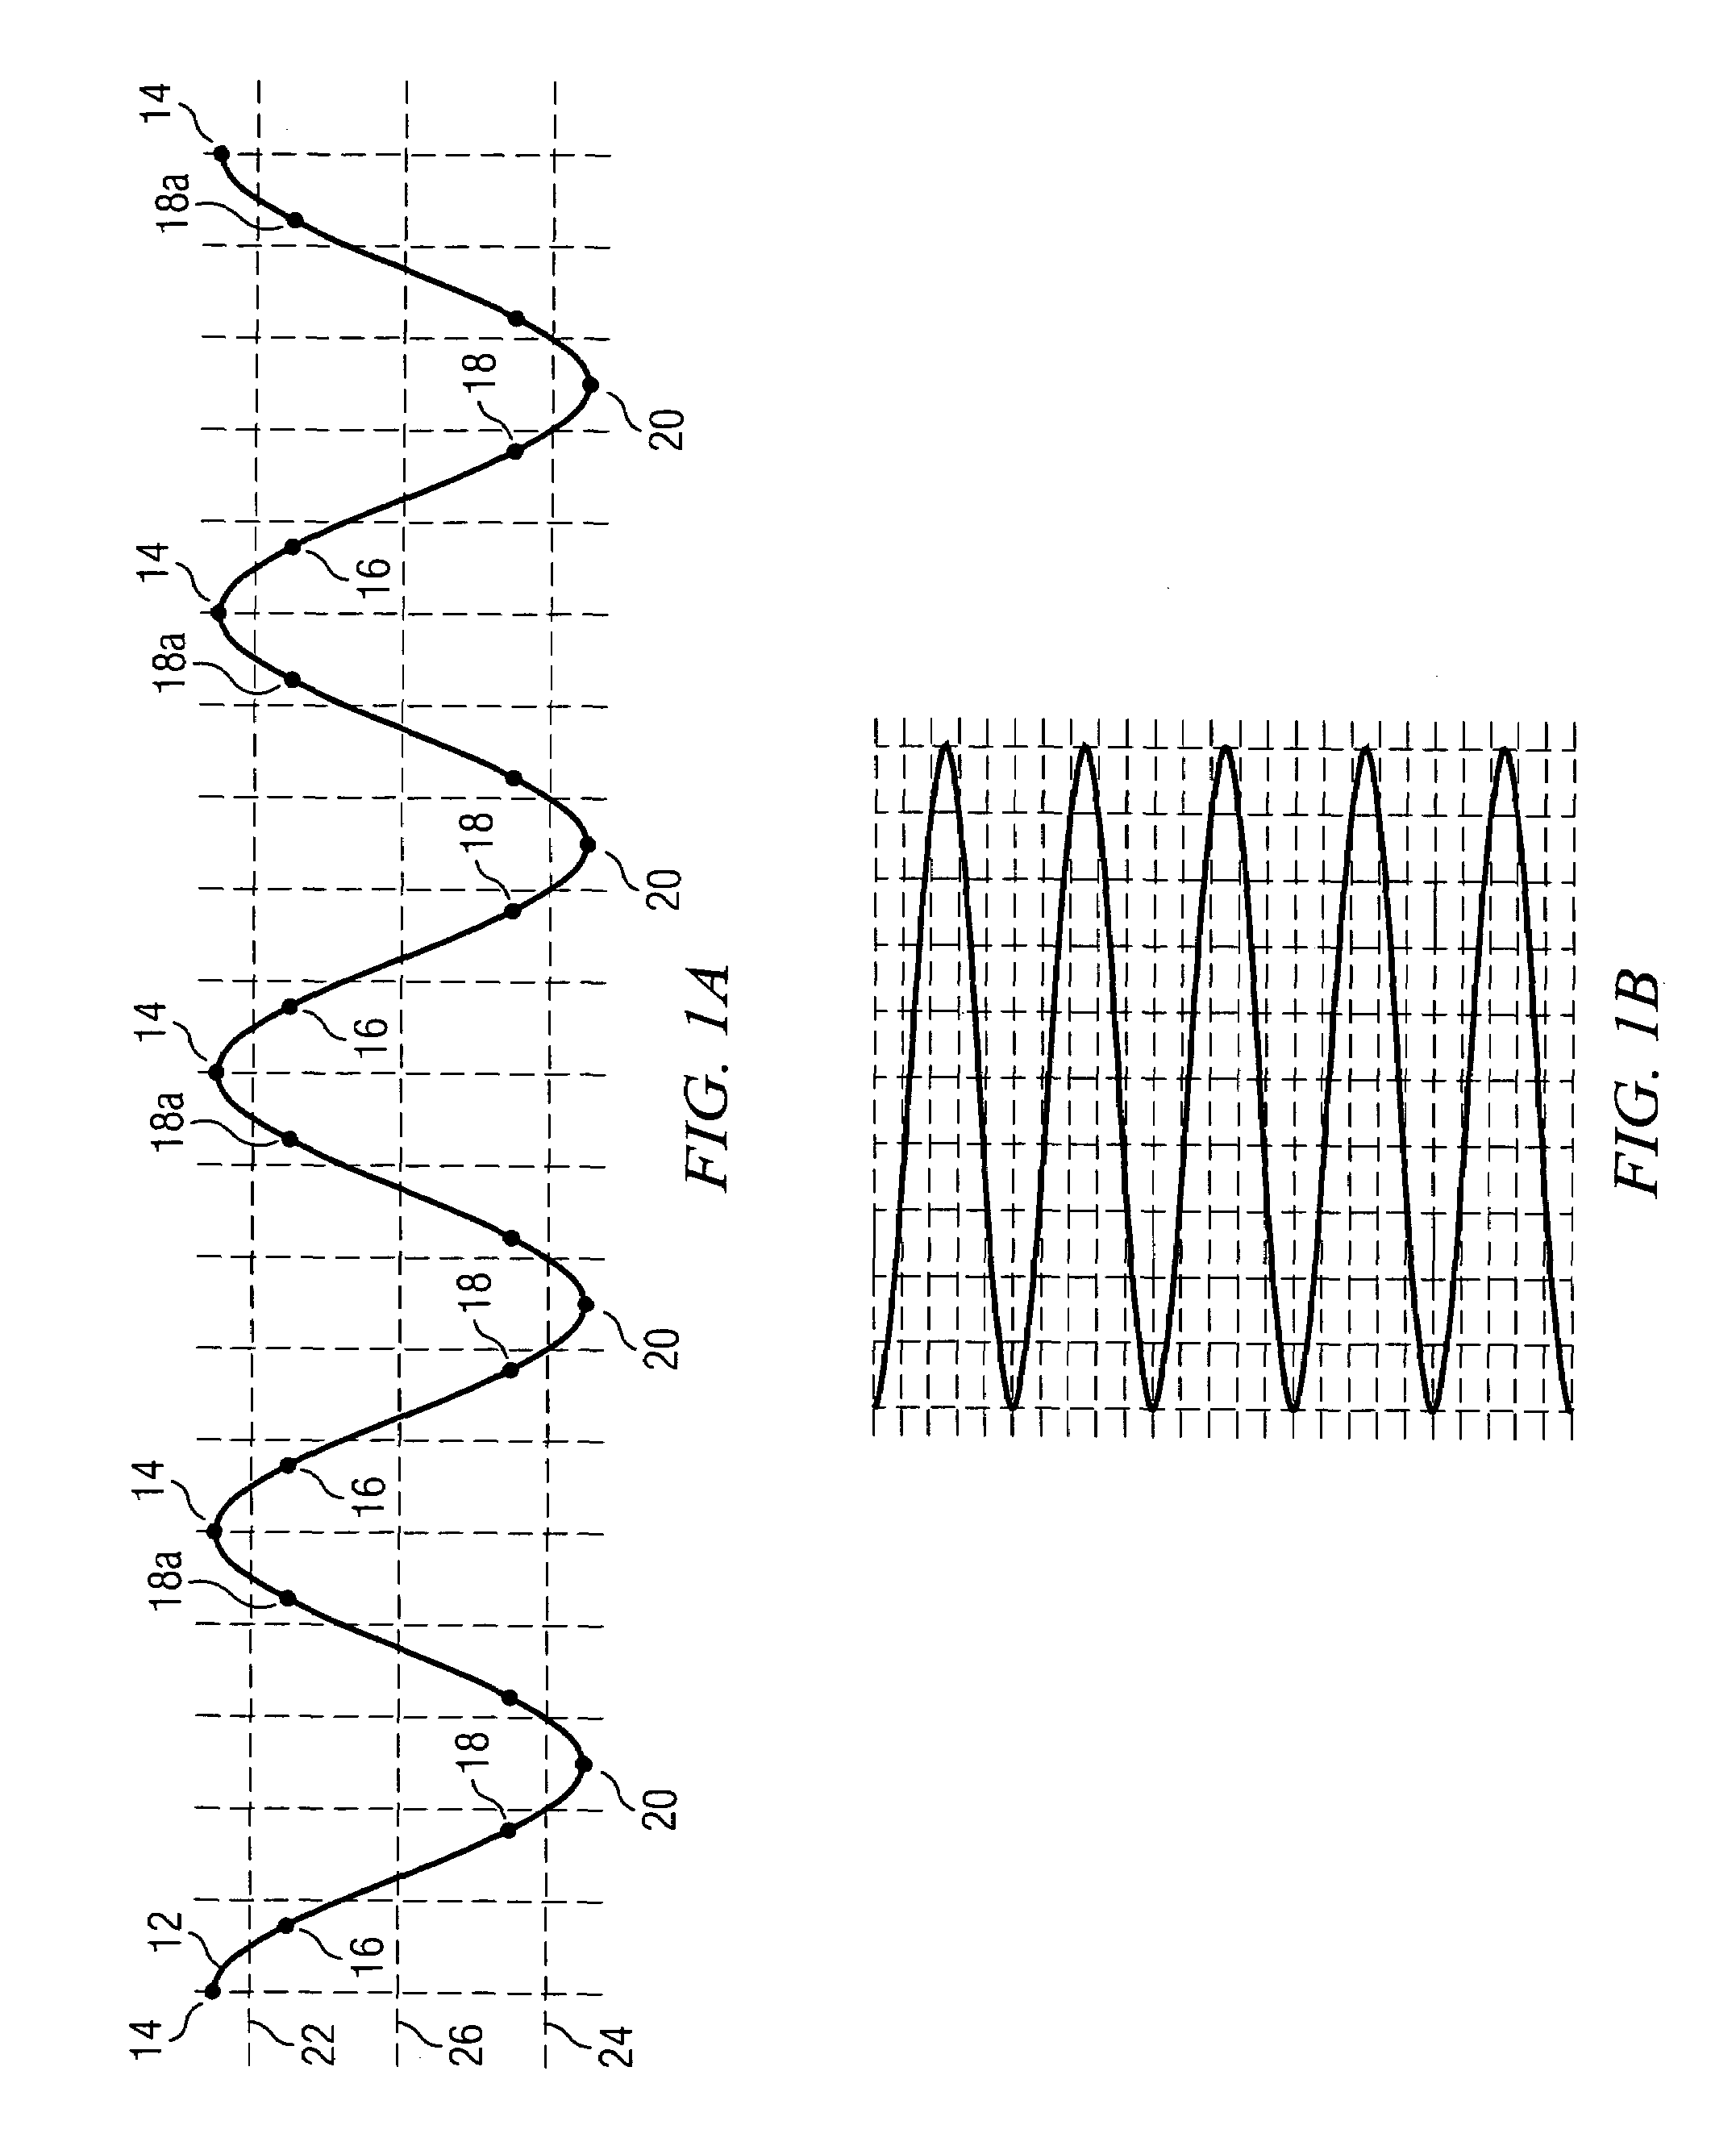 Method for synchronizing an image data source and a resonant mirror system to generate images